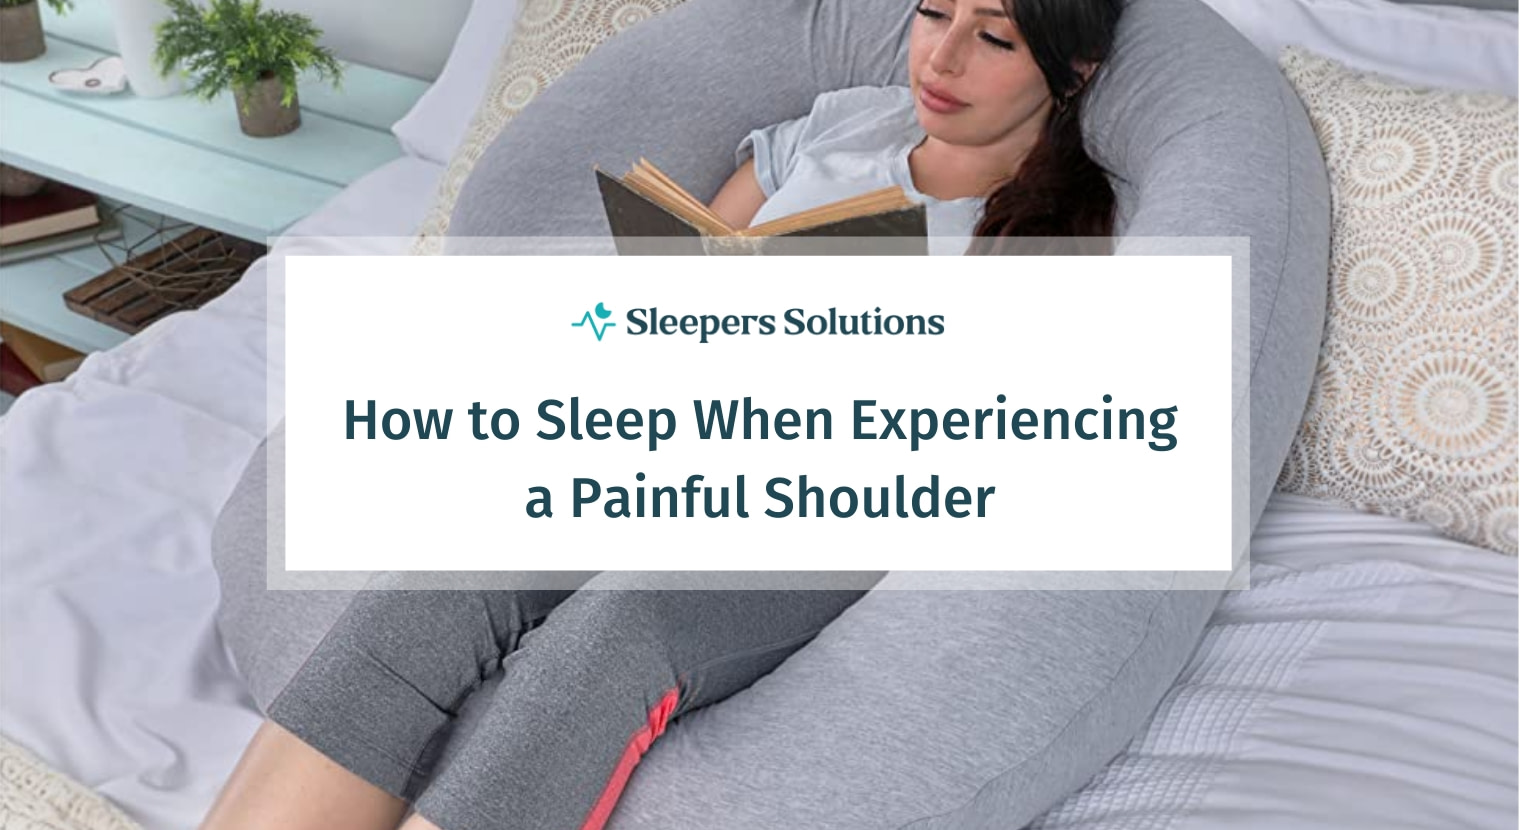 How to Sleep When Experiencing a Painful Shoulder